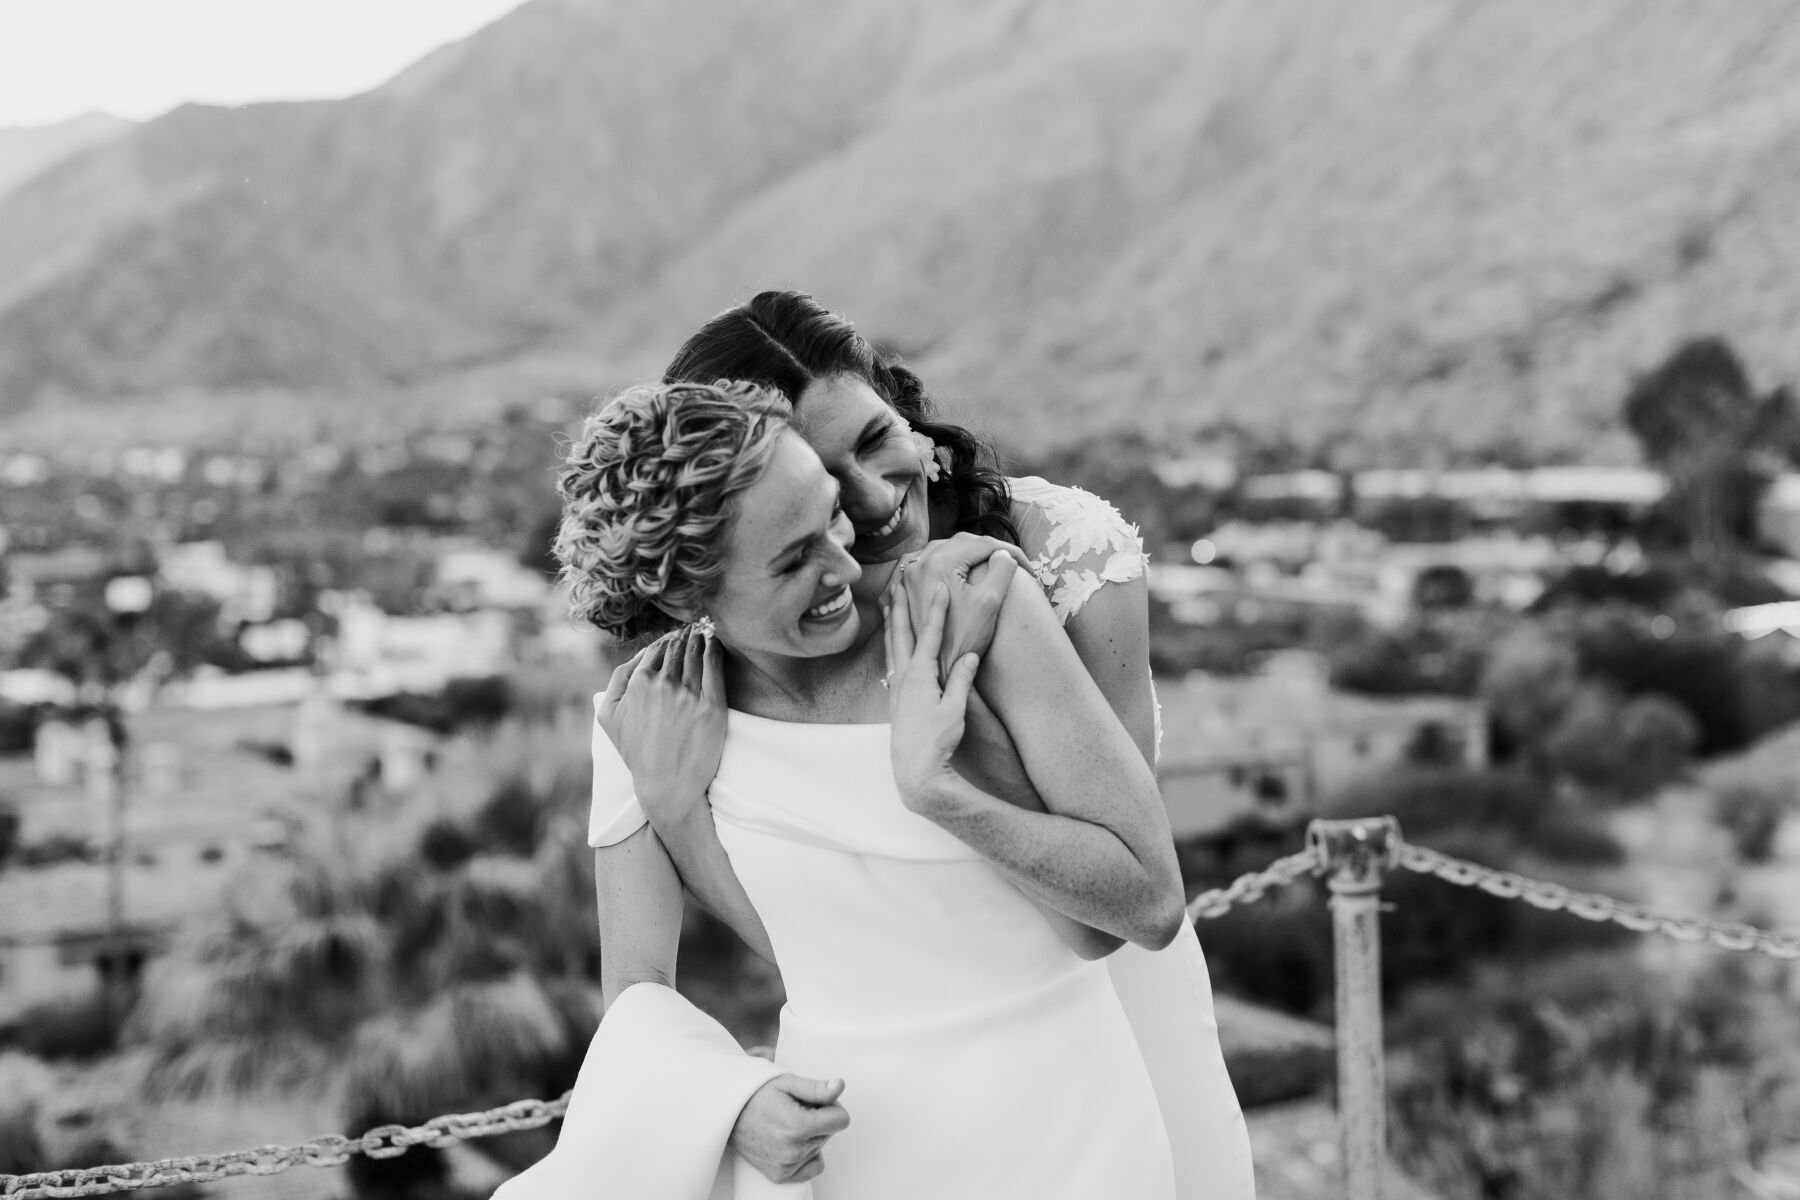 Pink Wedding: Two brides smiling and embracing on their wedding day in Palm Springs, California.